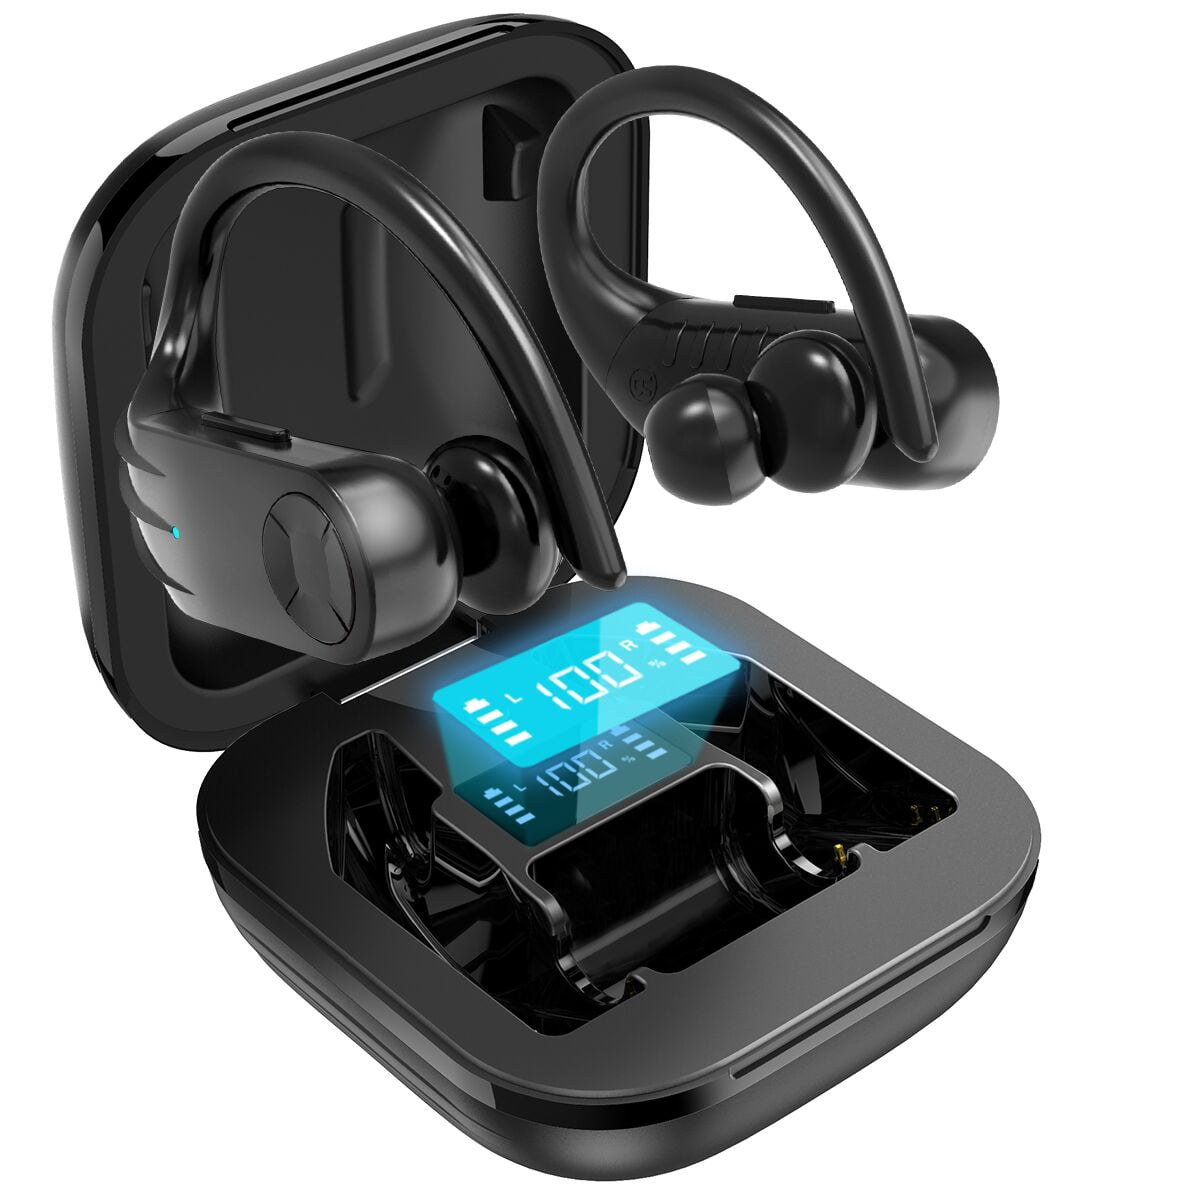 Wireless Earbuds Wireless Headphones with【24Hrs Charging Case】 Waterproof 3D Stereo Headphones in-Ear Built-in Mic Headset Premium Sound with Deep Bass for Apple Airpod Android Huawei Samsung